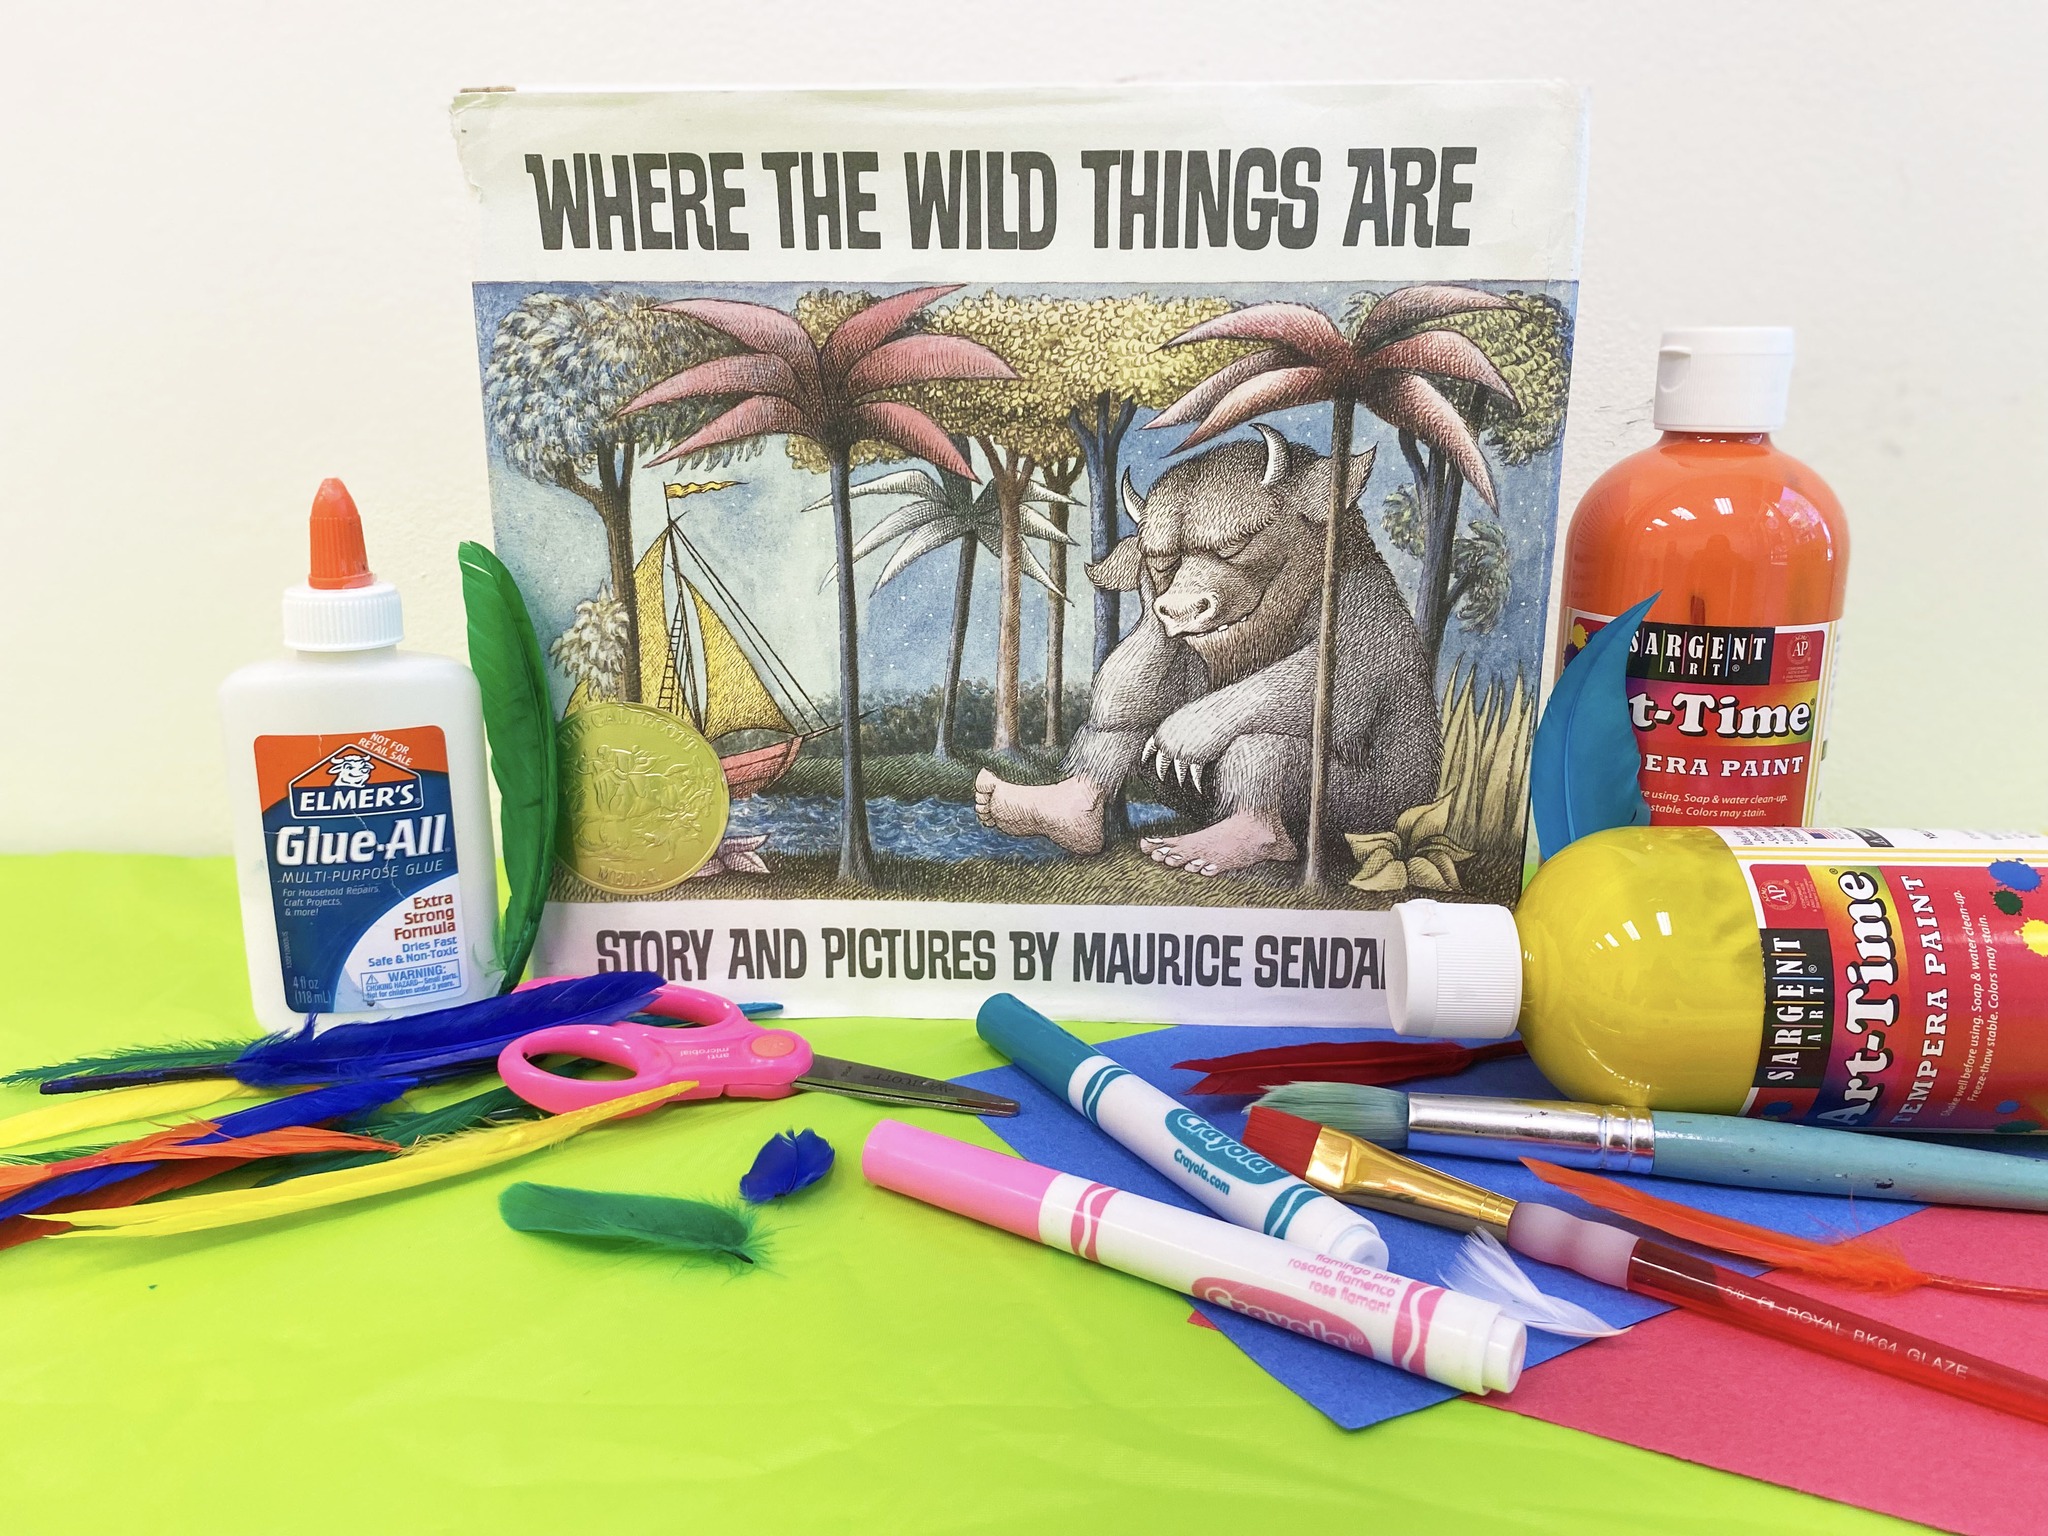 Orlando Museum of Art | Art Adventures: Where the Wild Things Are!